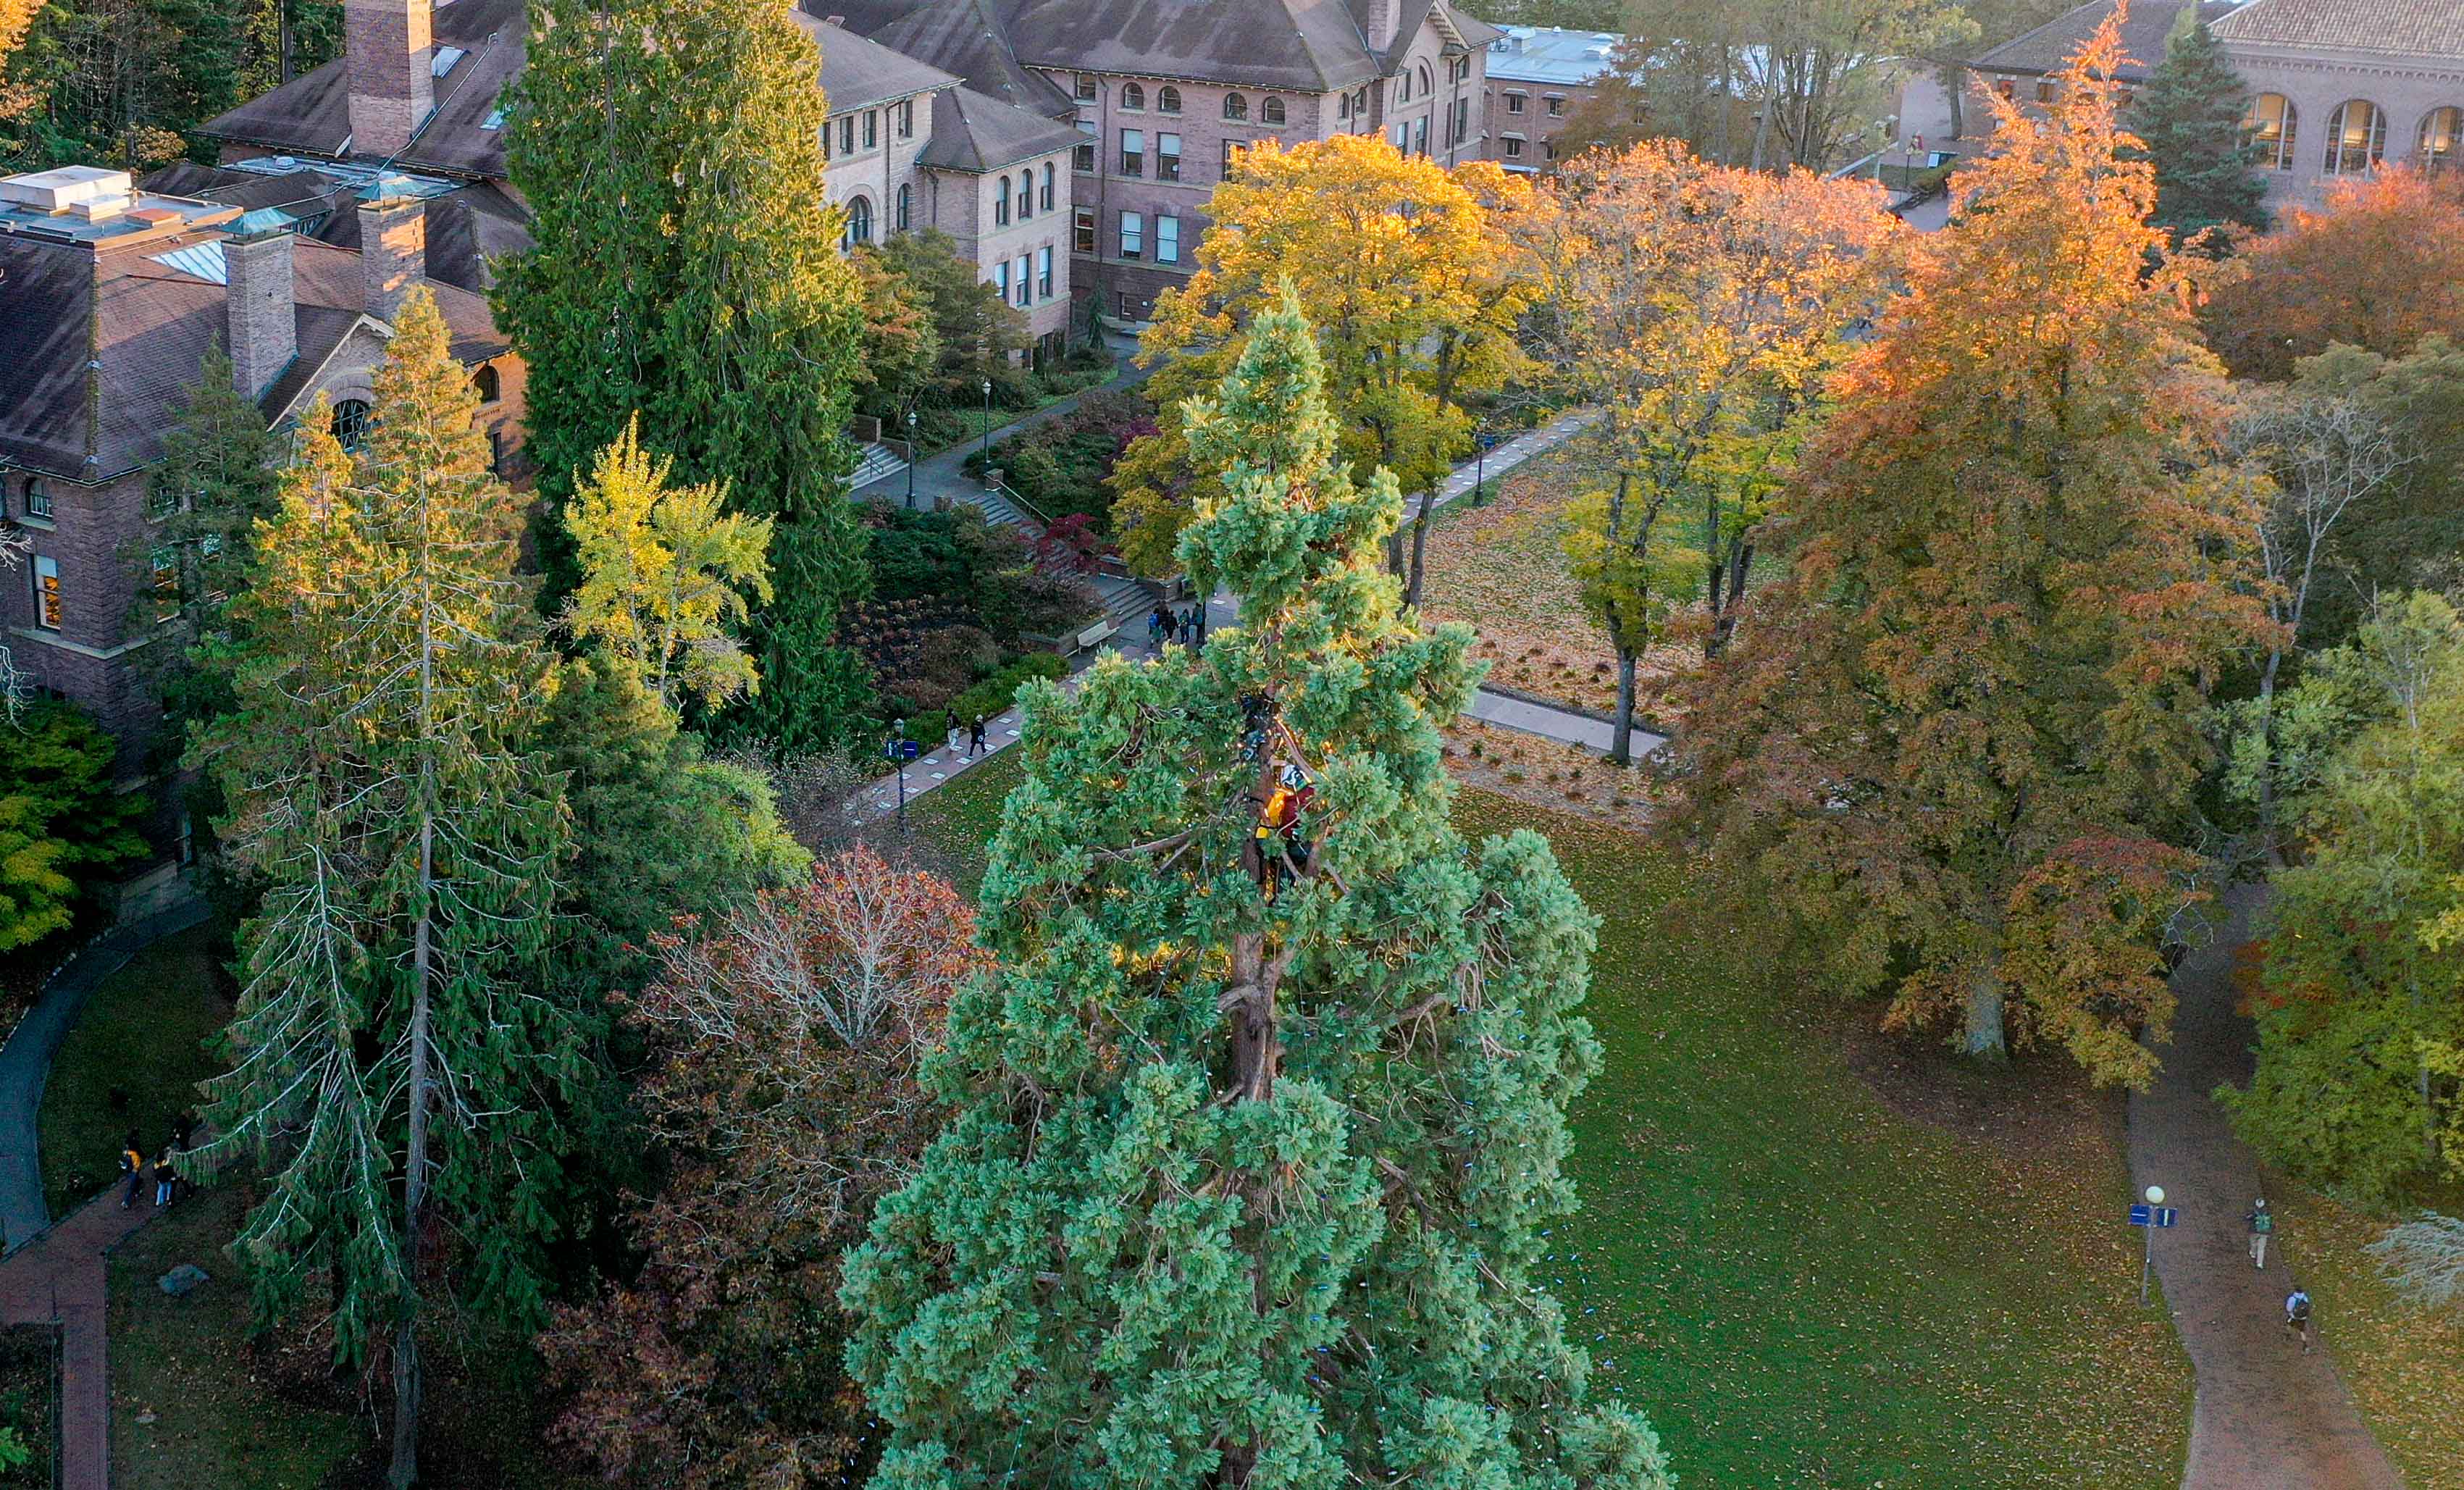 The WWU campus in Bellingham as seen from an aerial view. Large brick buildings are set among a lawn and trees displaying fall foliage.